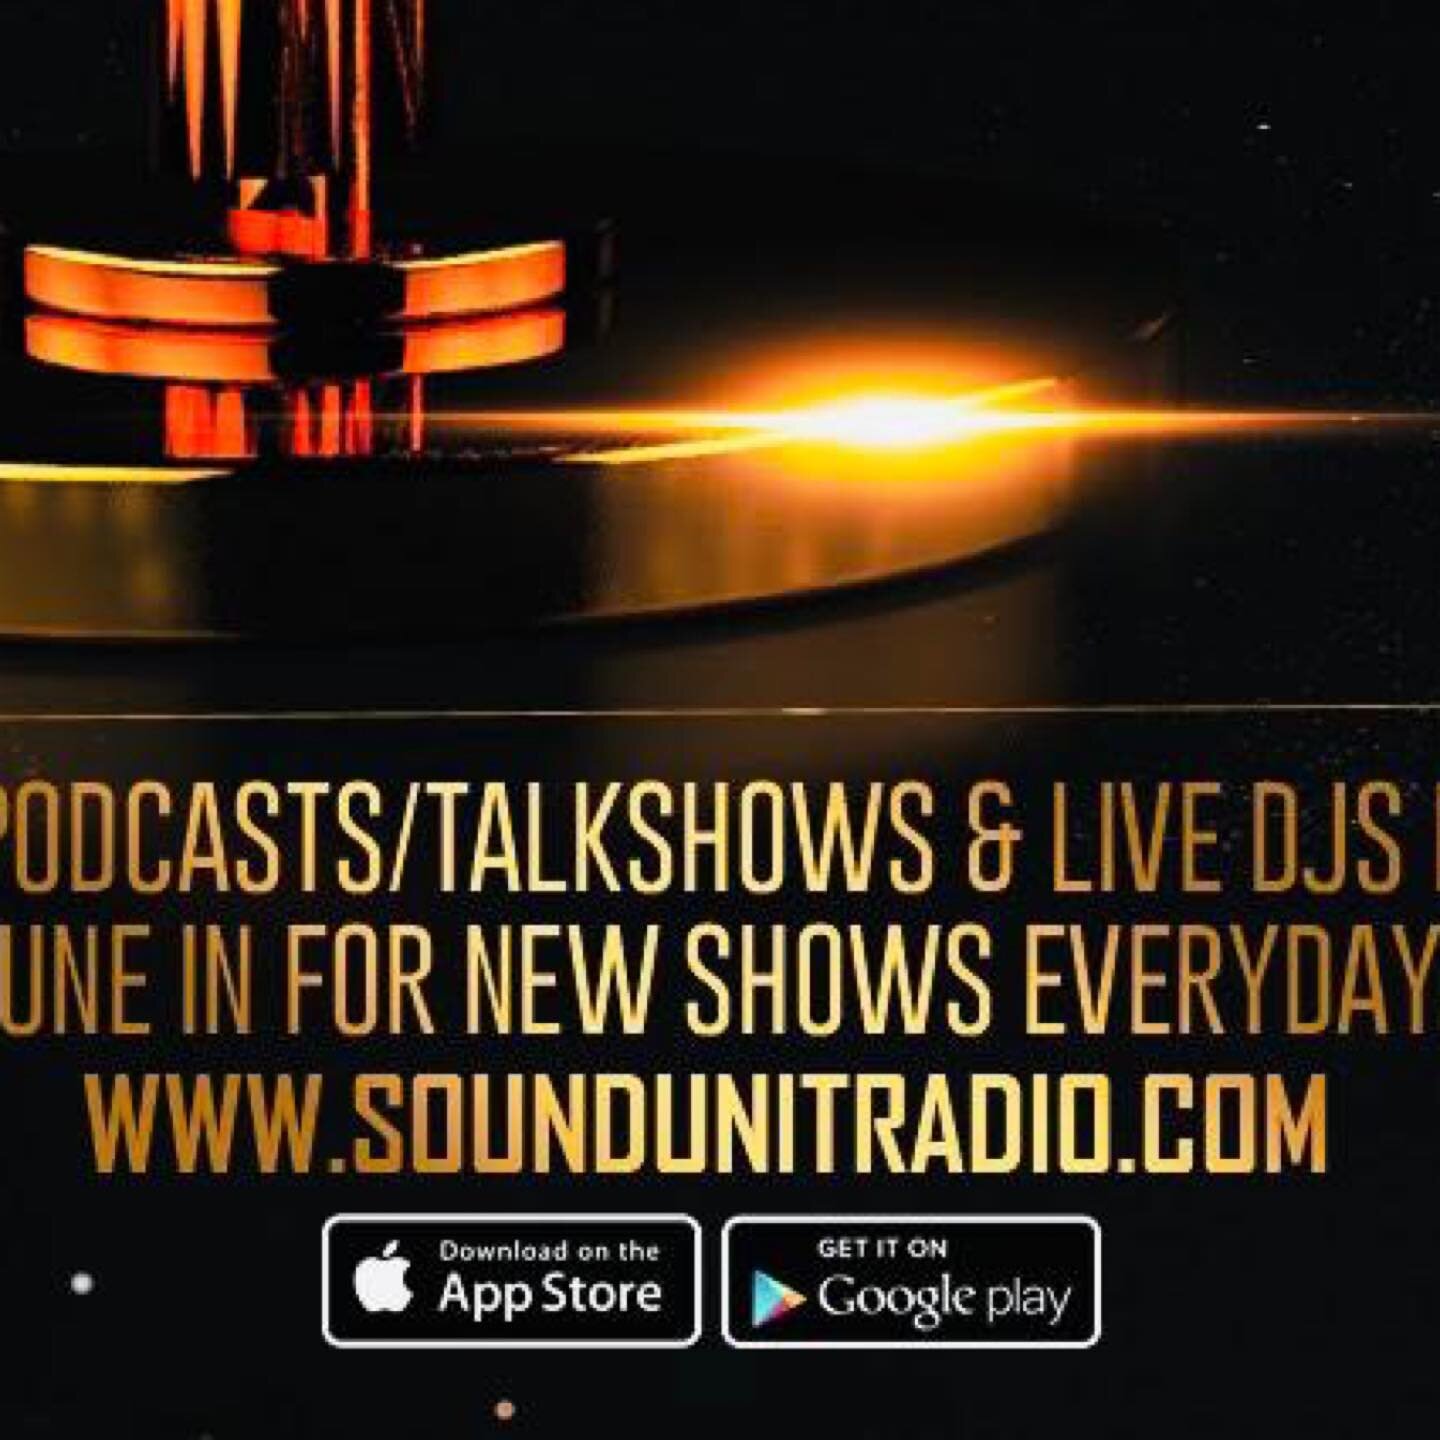 Get real familiar!!!
.
@soundunitradio is taking it to a whole new level! All new #podcasts / #talkshows &amp; #DJs #Everyday!!!
.
@thewowcast 
@cqnetwork 
@theeyardieboyz 
@thepourcast 
@thepinksituationroom 
@theabroaddj 
@blendwithus 
.
@carlitosw